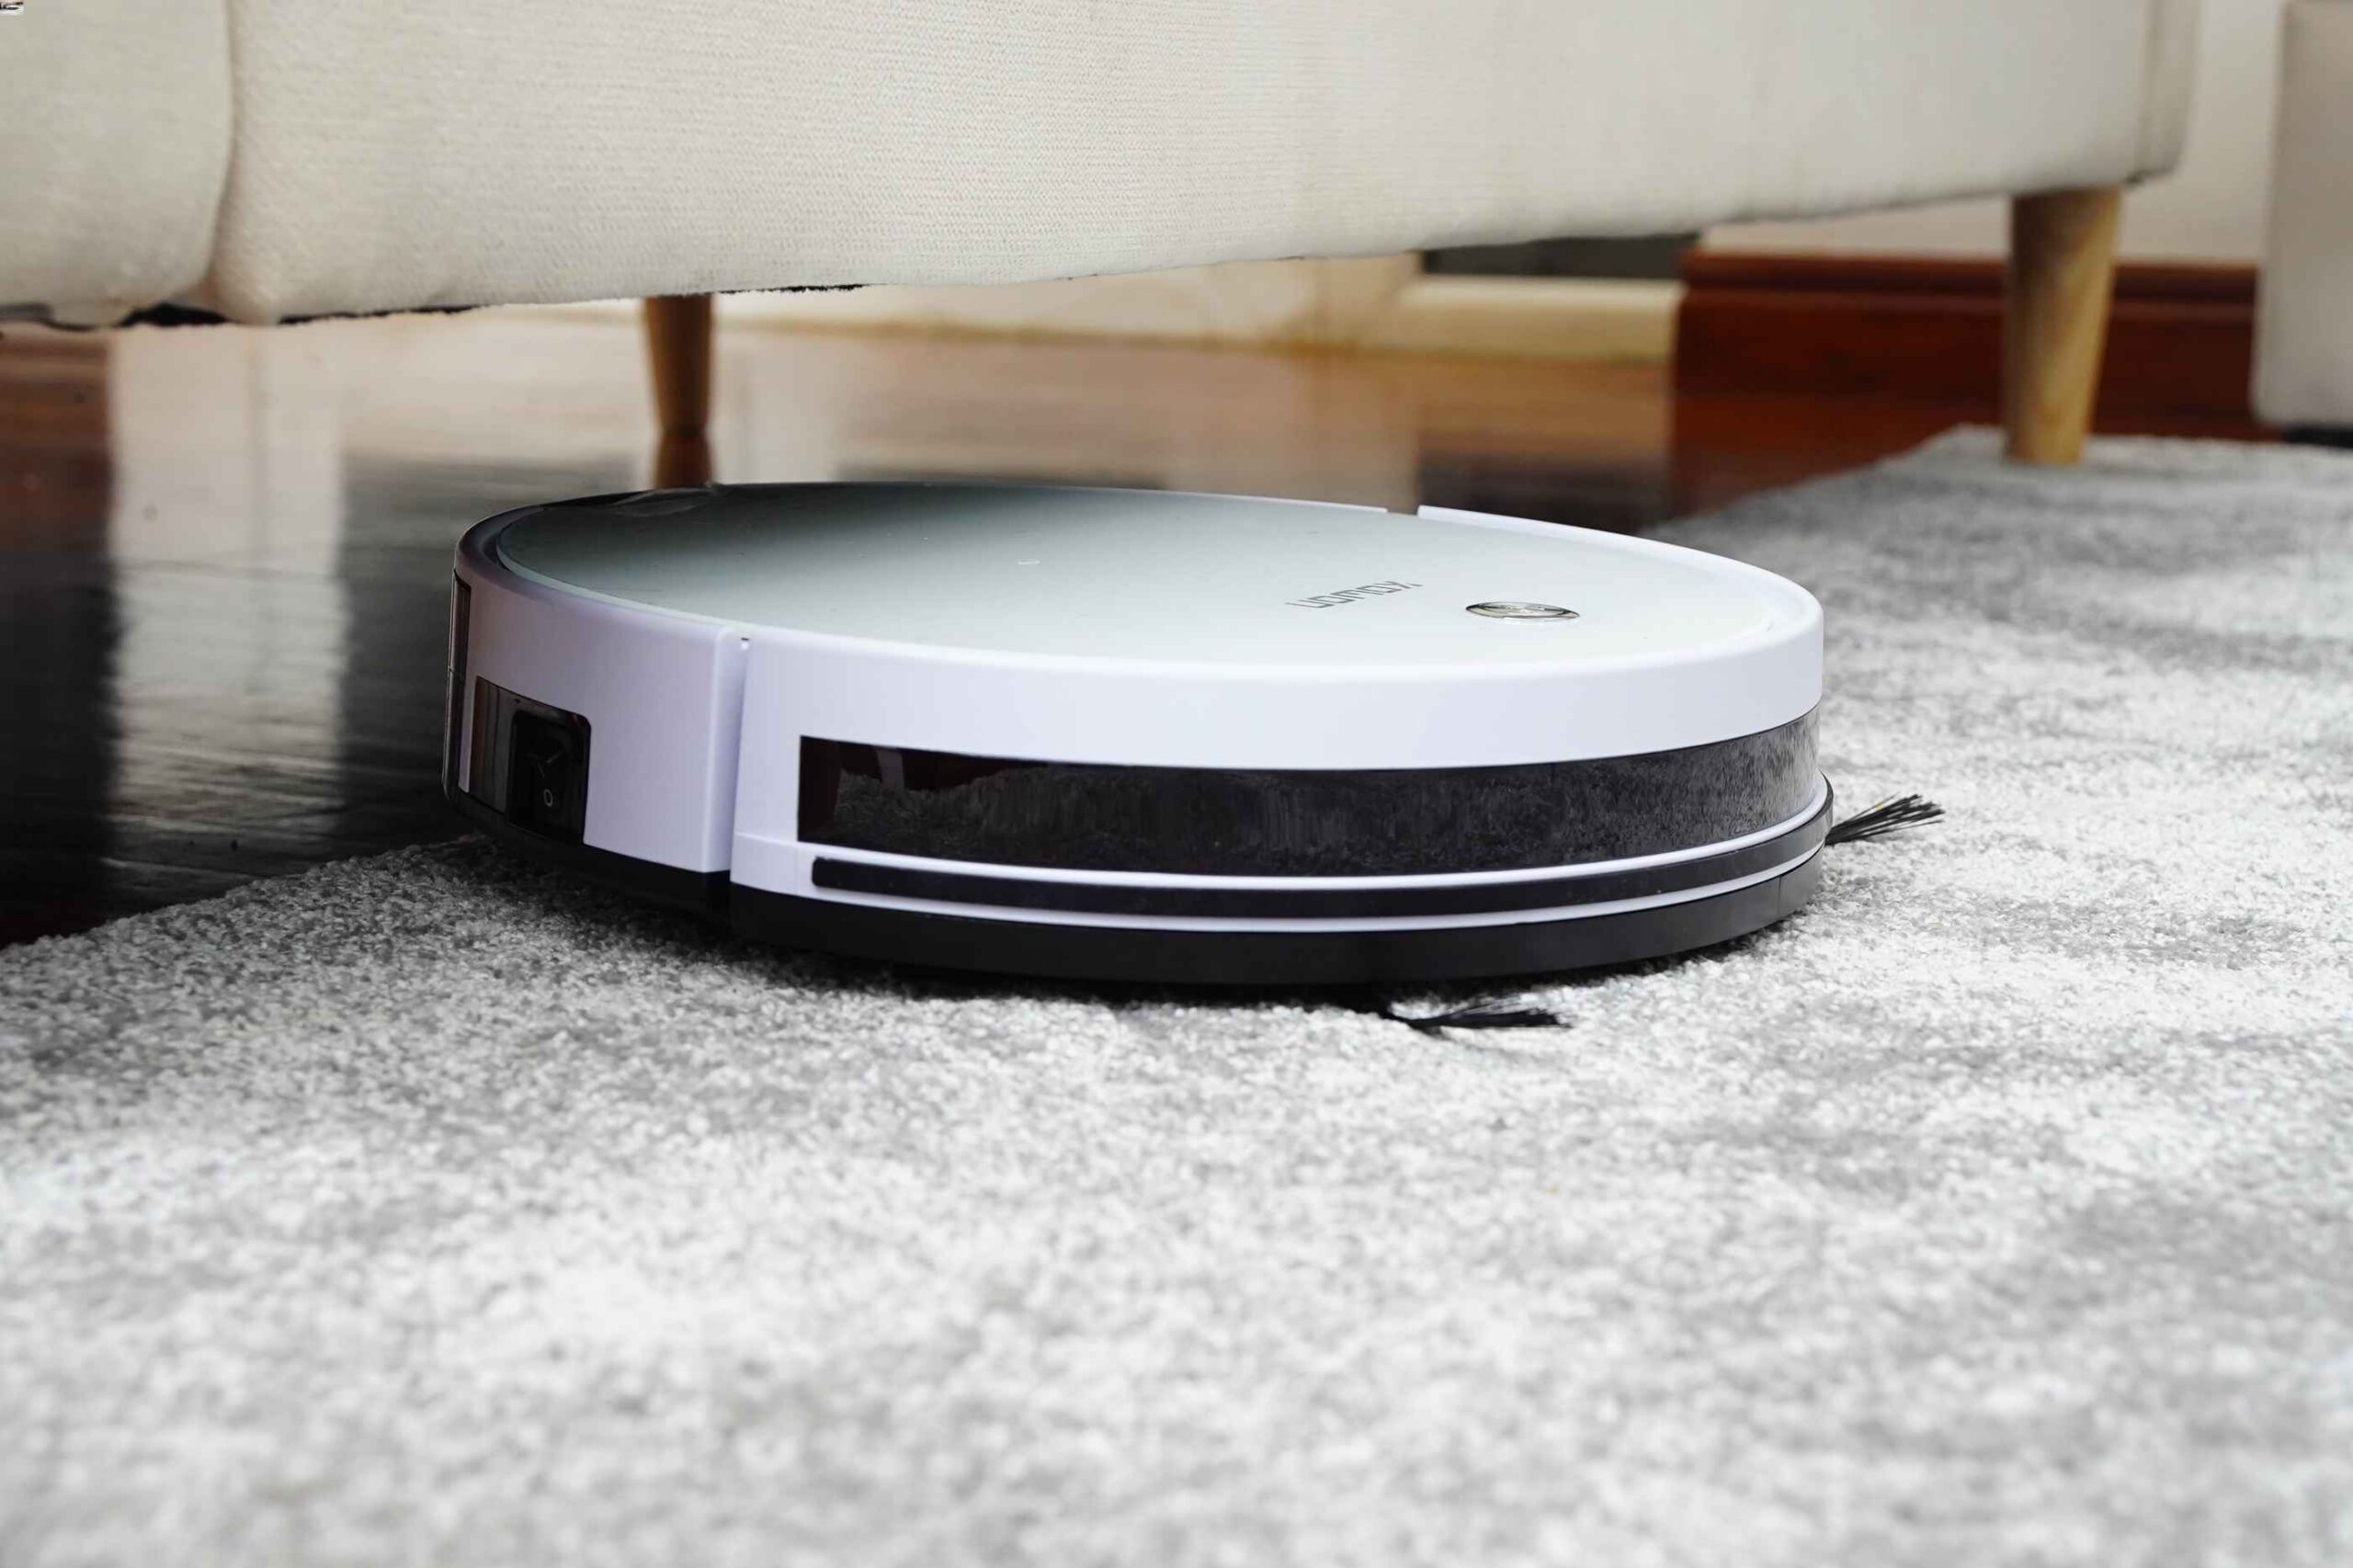 Which Brand of Robot Vacuum Cleaner is the Best and How it Works